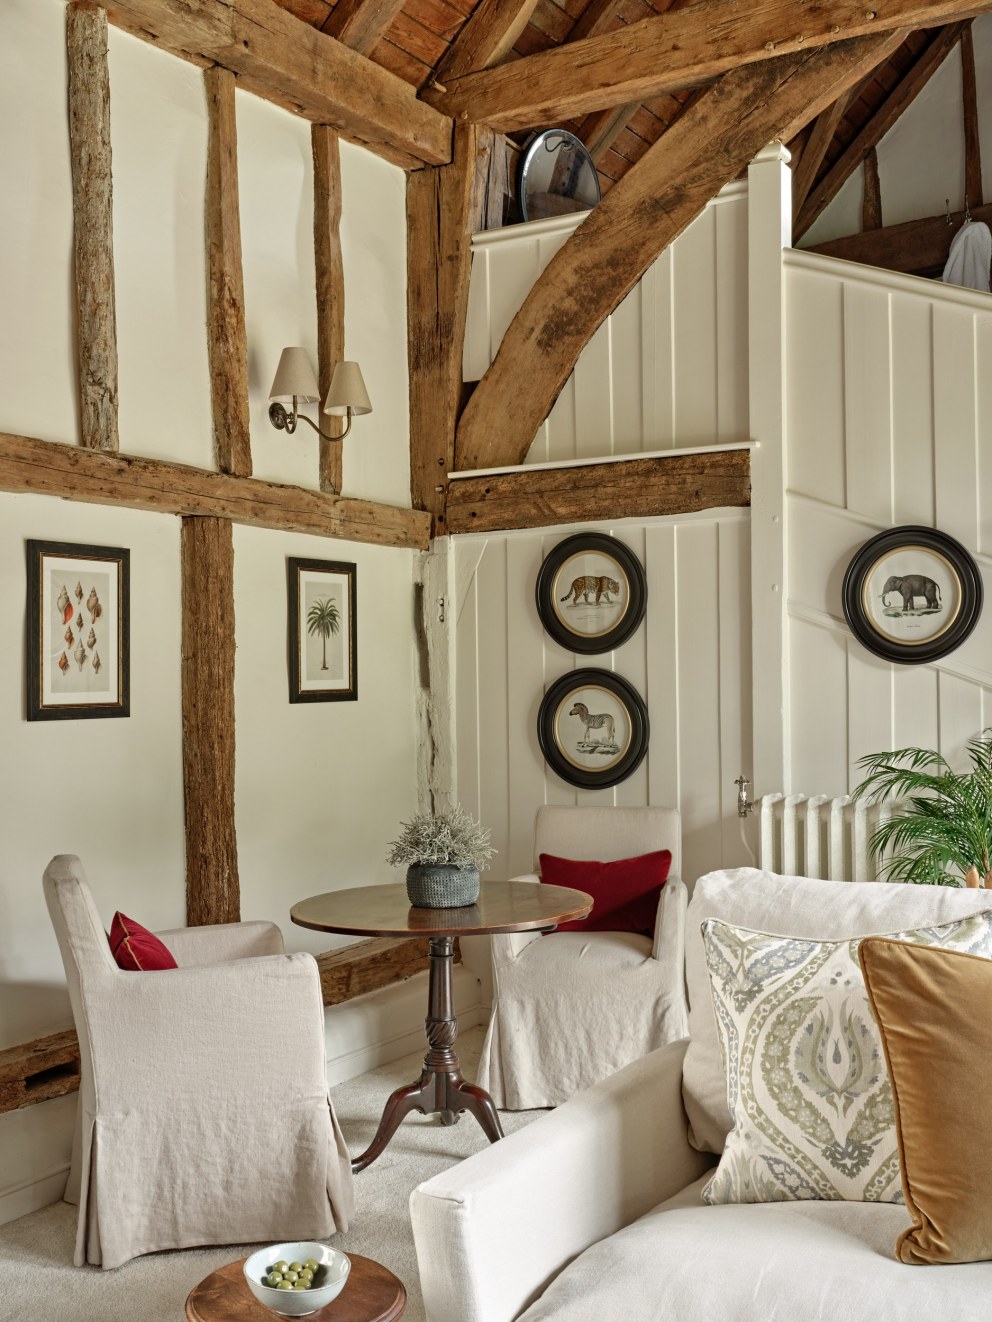 The New Forest Barn  | The Grand Room | Interior Designers